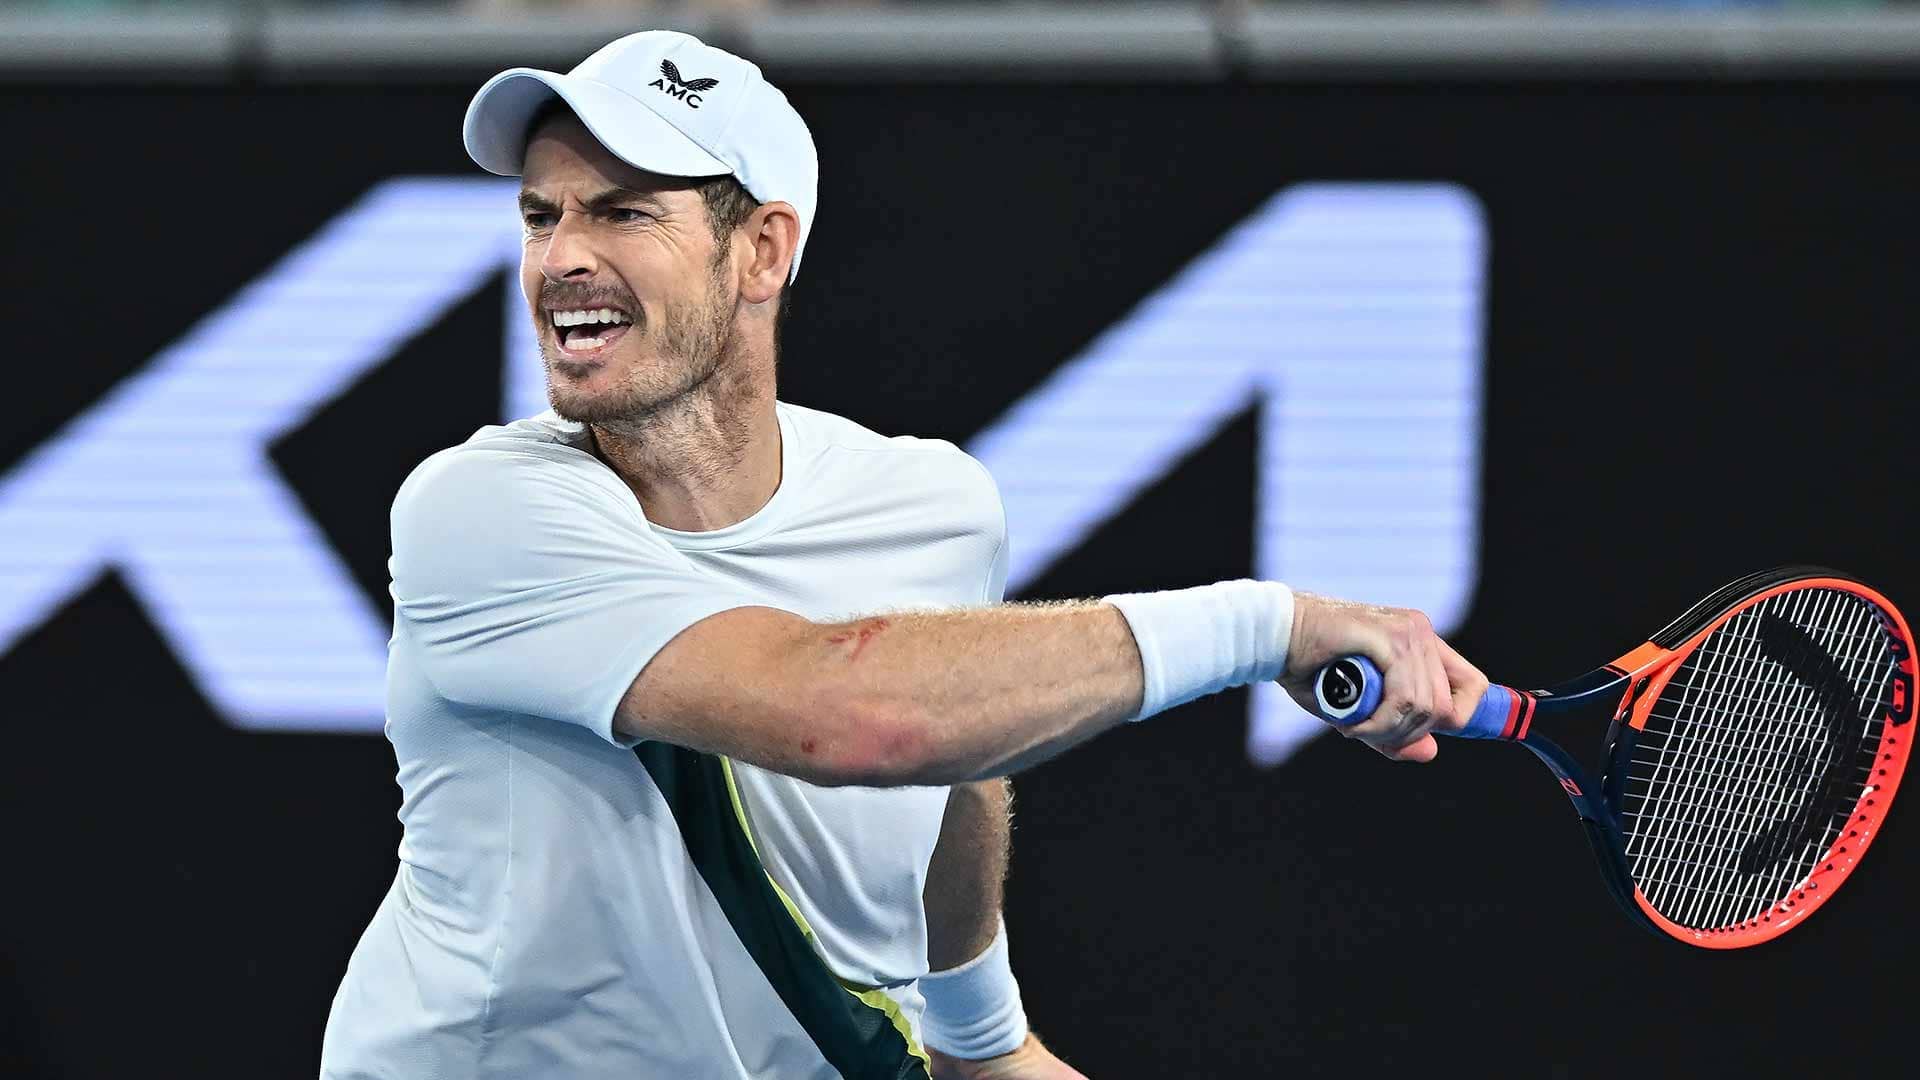 Andy Murray played 14 sets across three matches at the 2023 Australian Open.